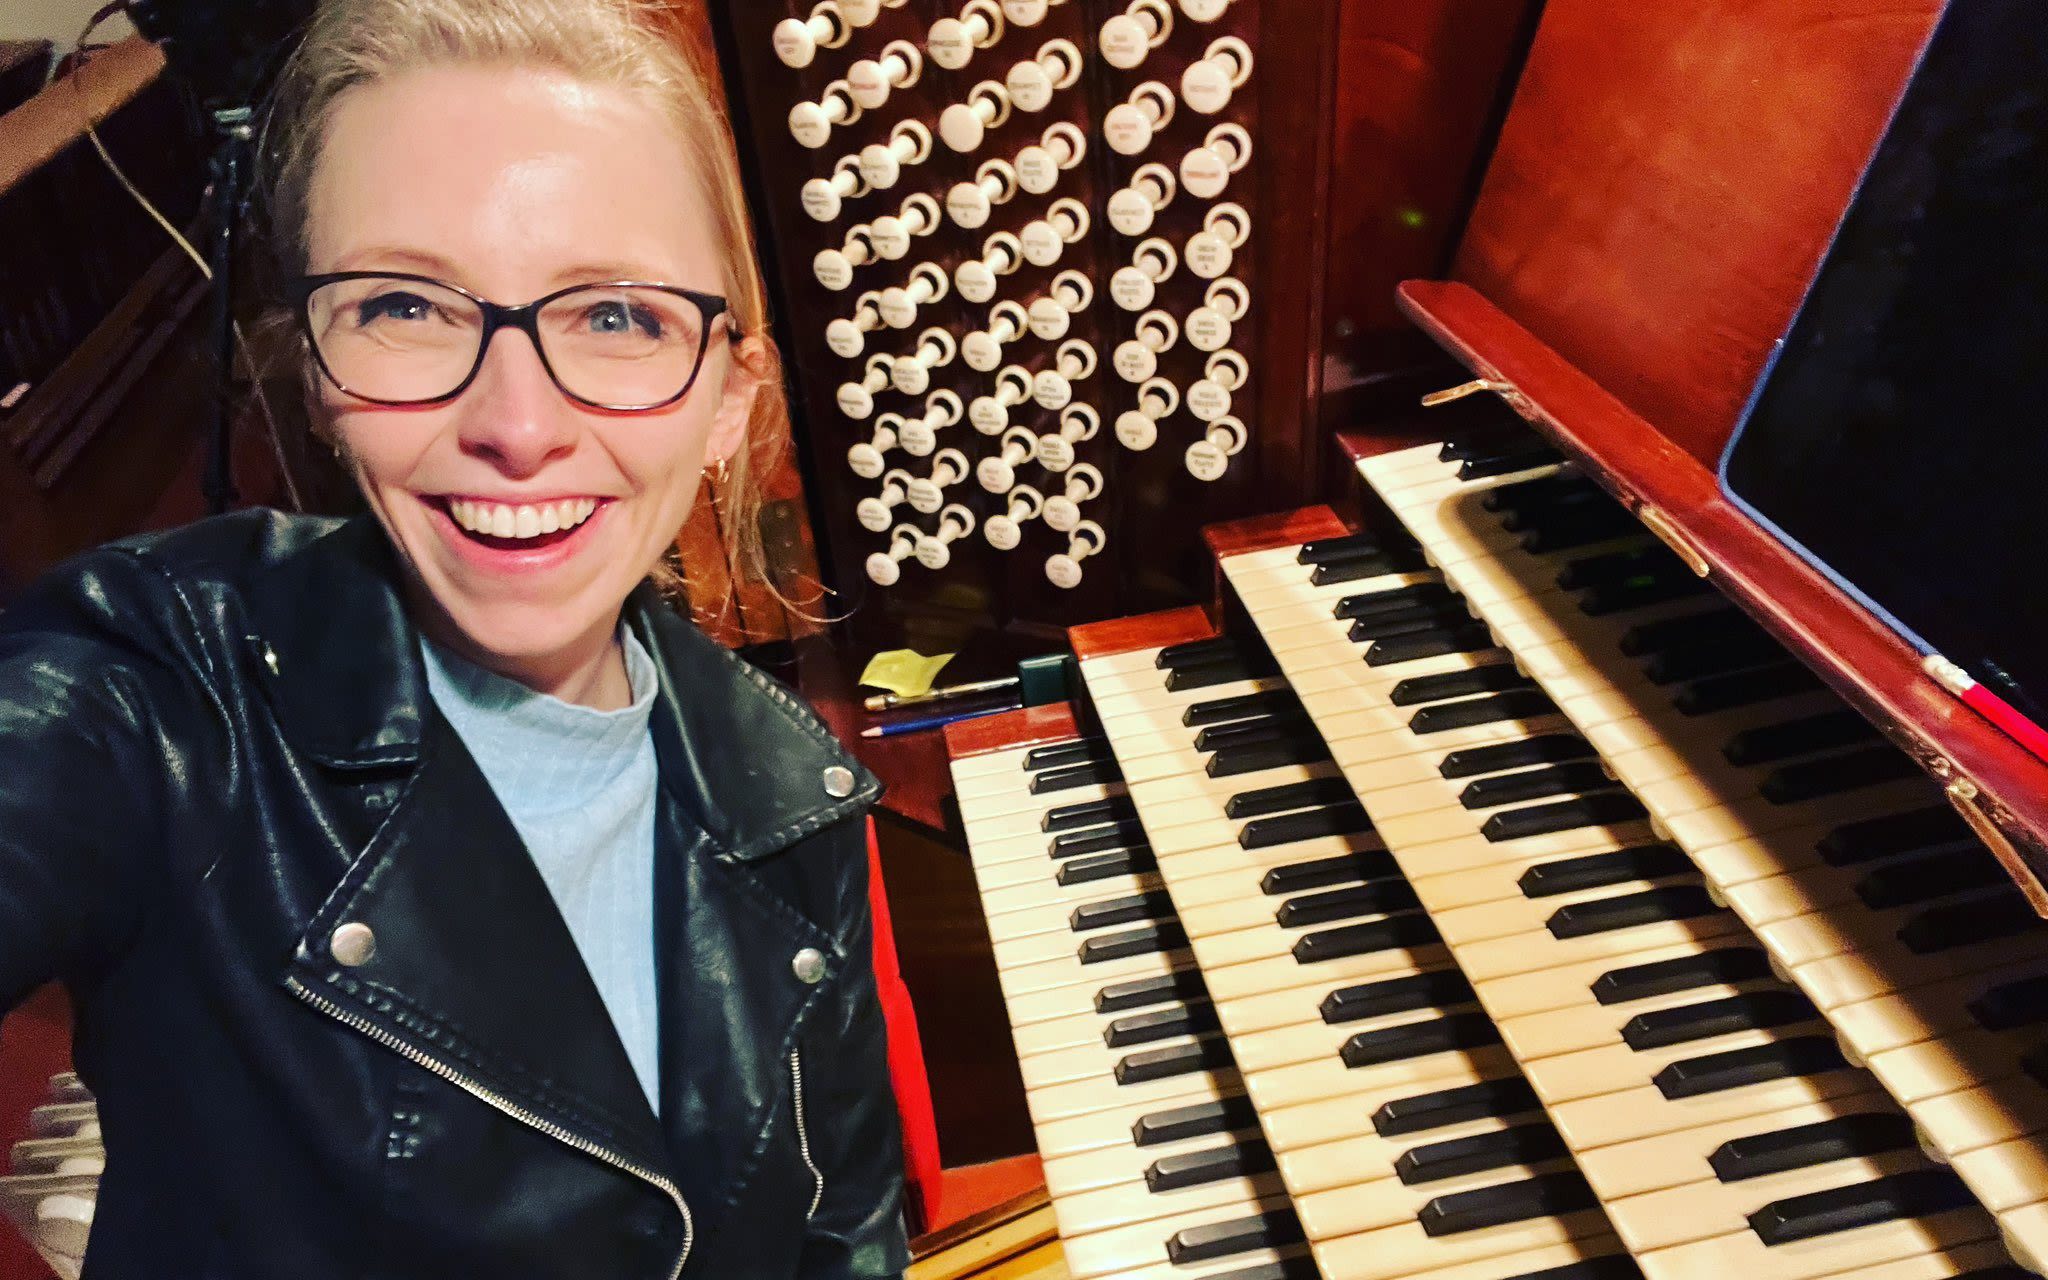 ‘It’s not just a hymn machine’: how organ music became hip